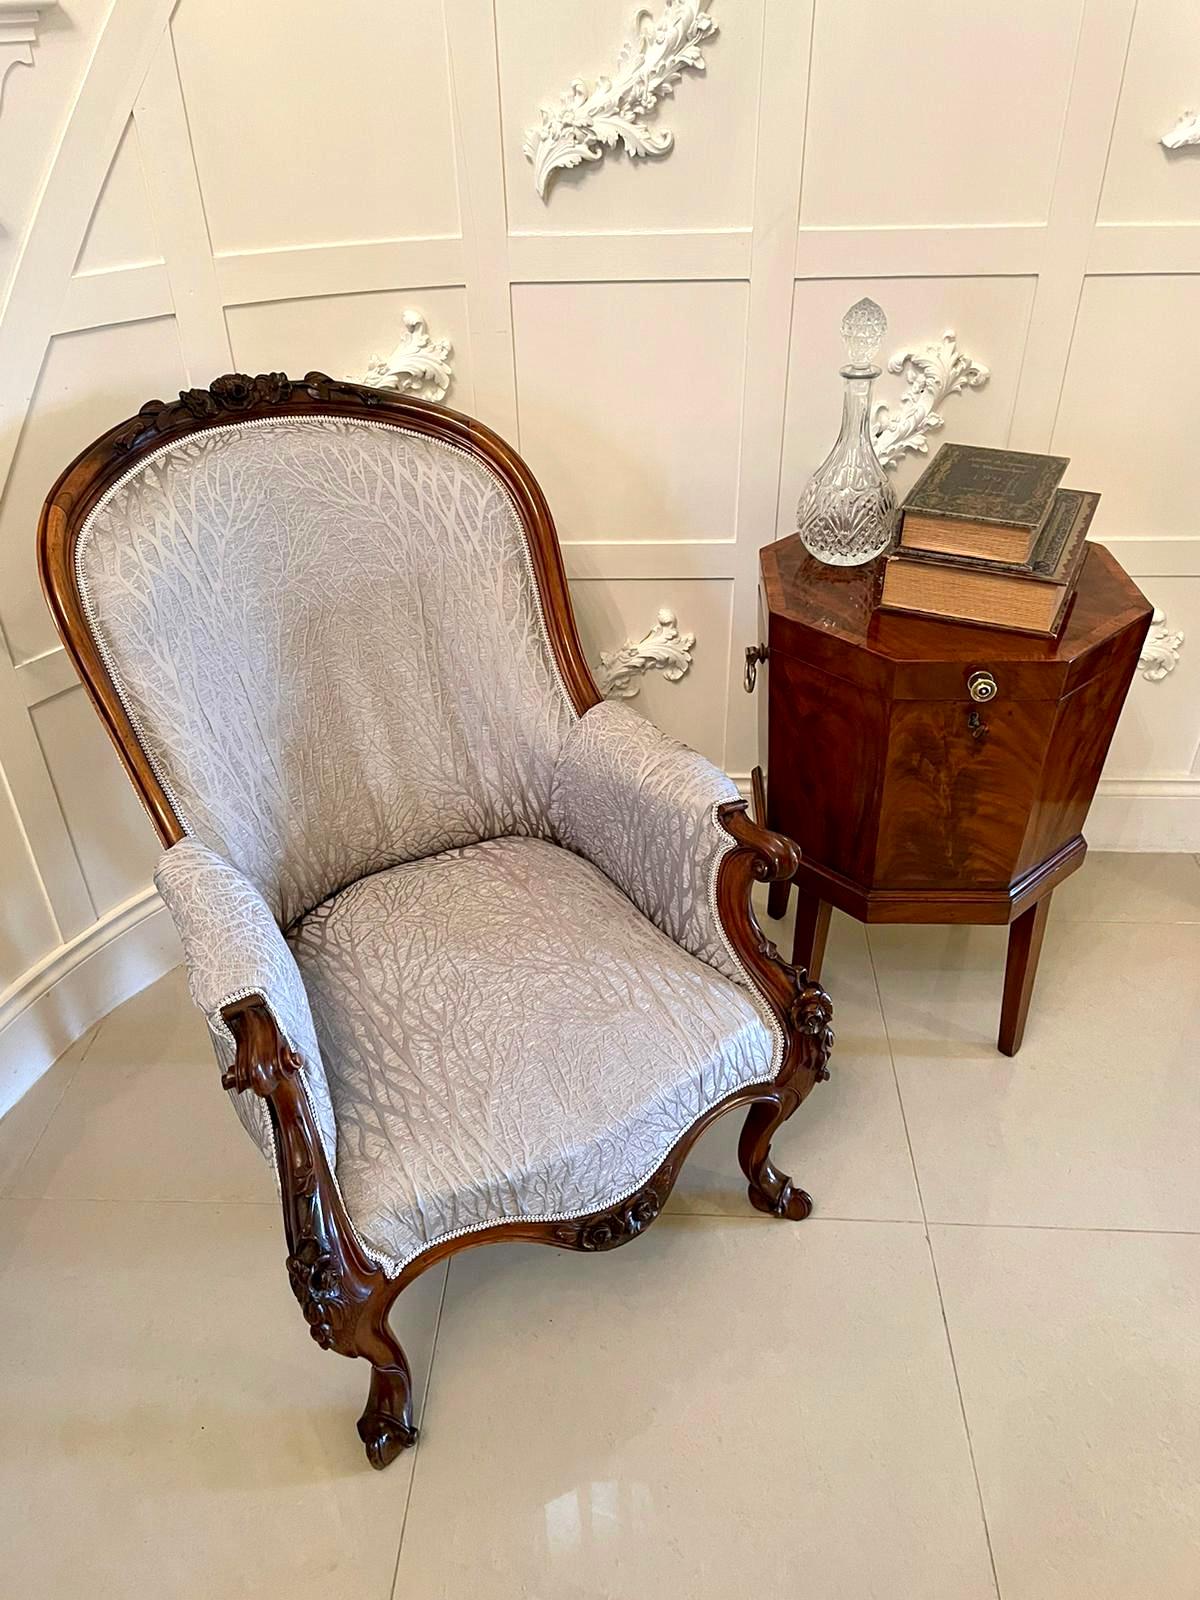 Quality 19th century Victorian antique mahogany carved library chair having a glorious quality shaped carved mahogany back depicting pretty flowers, divine scrolled arms finely carved with the most appealing flowers to the knees. This terrific